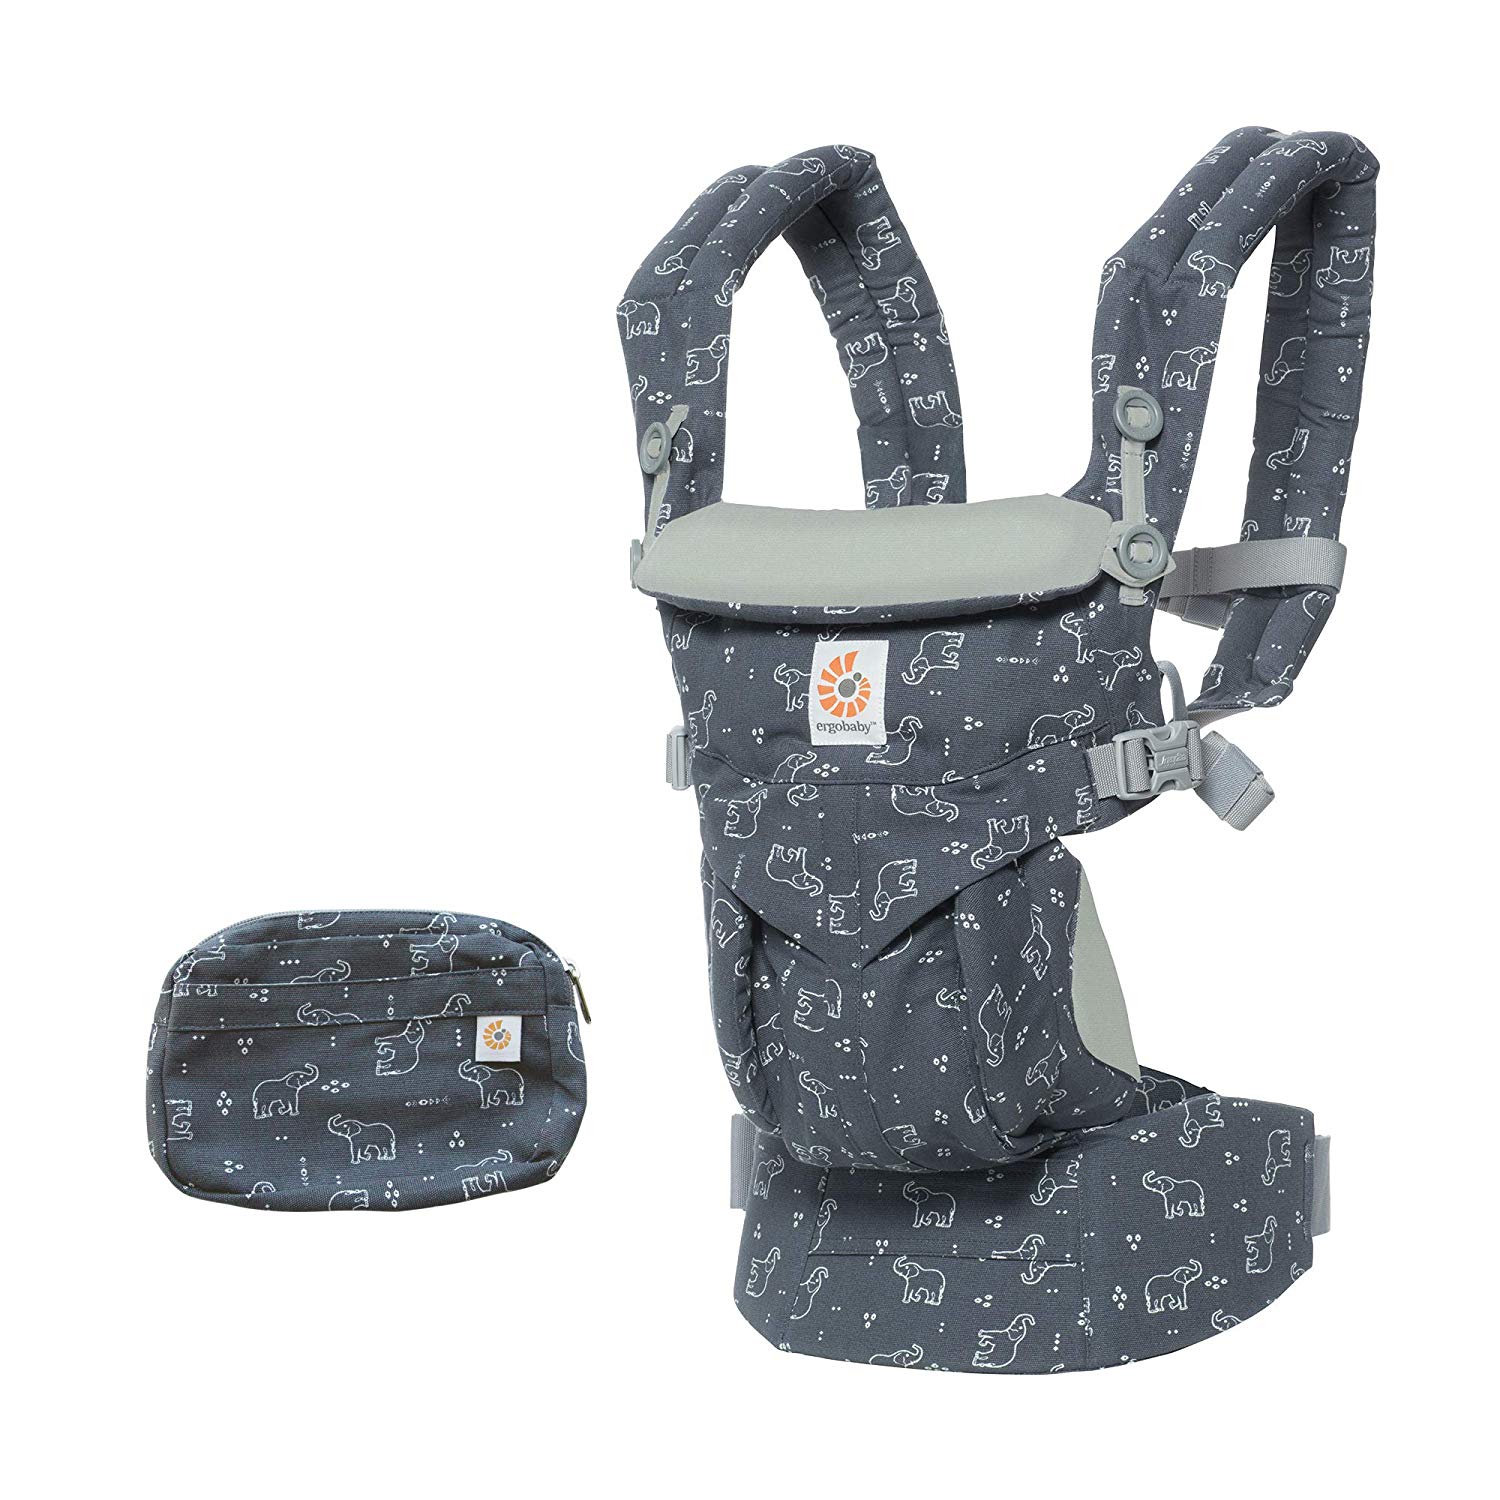 Ergobaby baby carrier for newborns from birth up to 20 kg, 4-position Omni 360 Trunks Up, front carrier back carrier